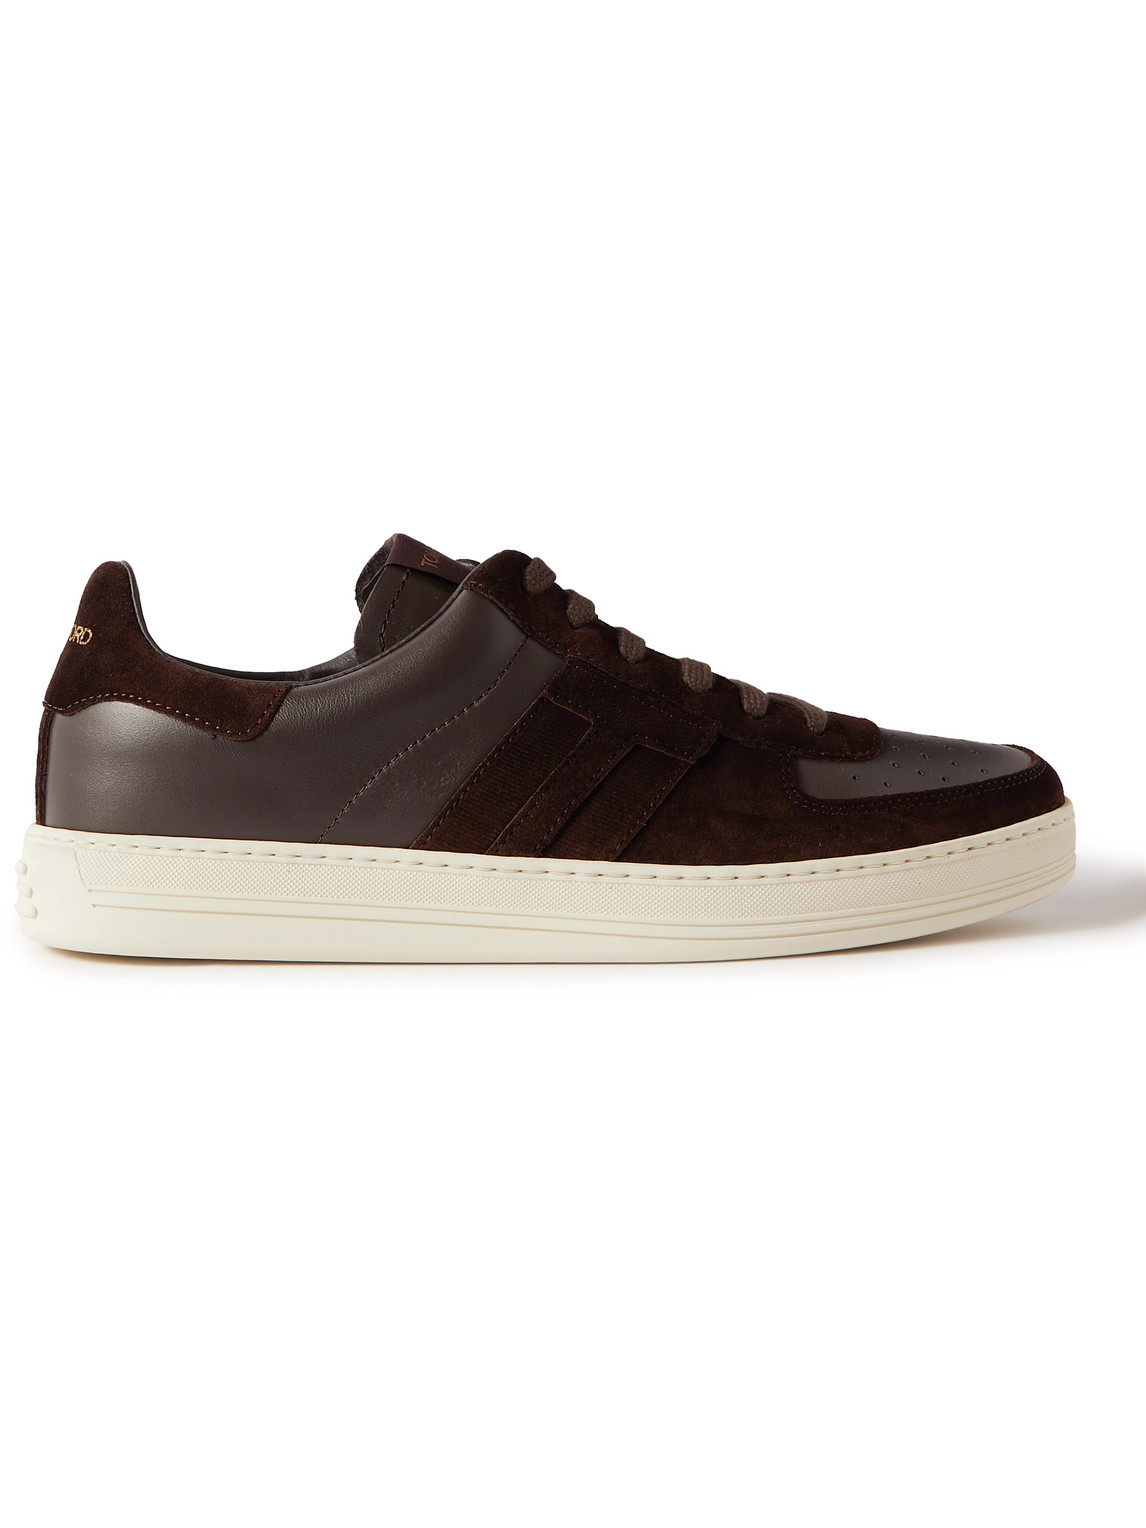 Tom Ford Radcliffe Suede And Leather Sneakers In Brown